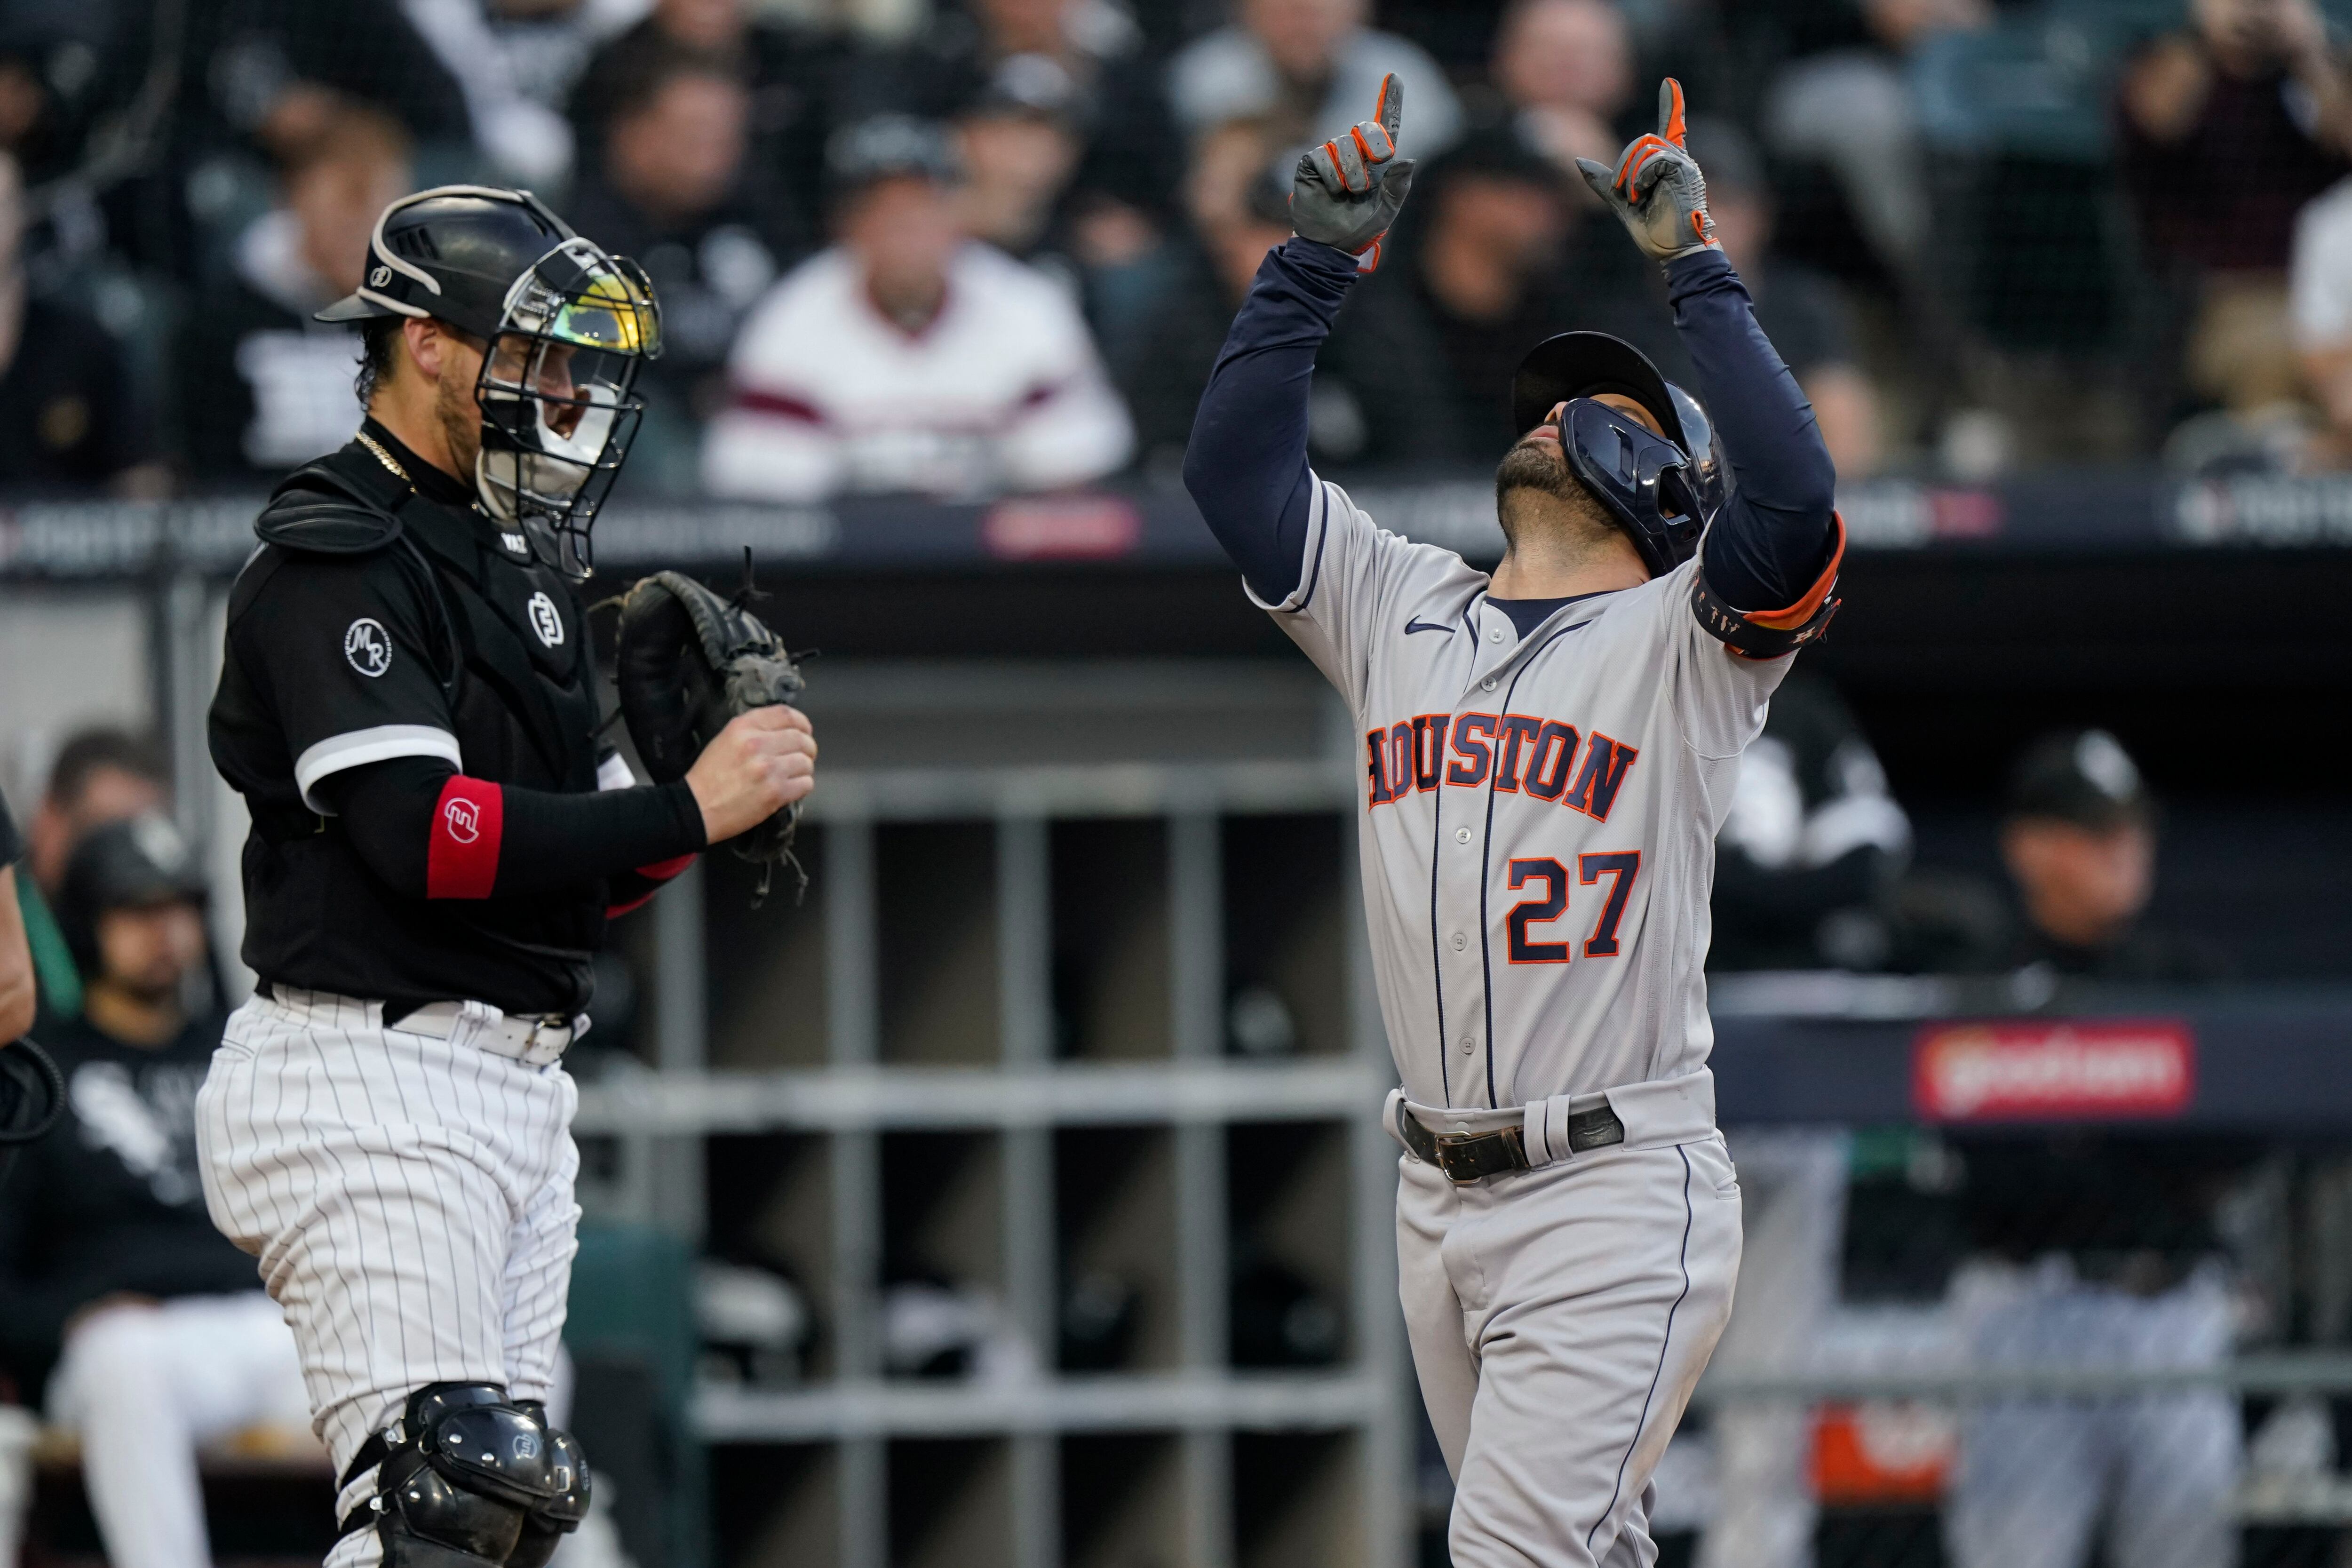 ESPN Stats & Info on X: Kyle Tucker is the 3rd Astros player with a 3 HR  game on the road over the last 20 seasons. He joins Yordan Alvarez and  Carlos